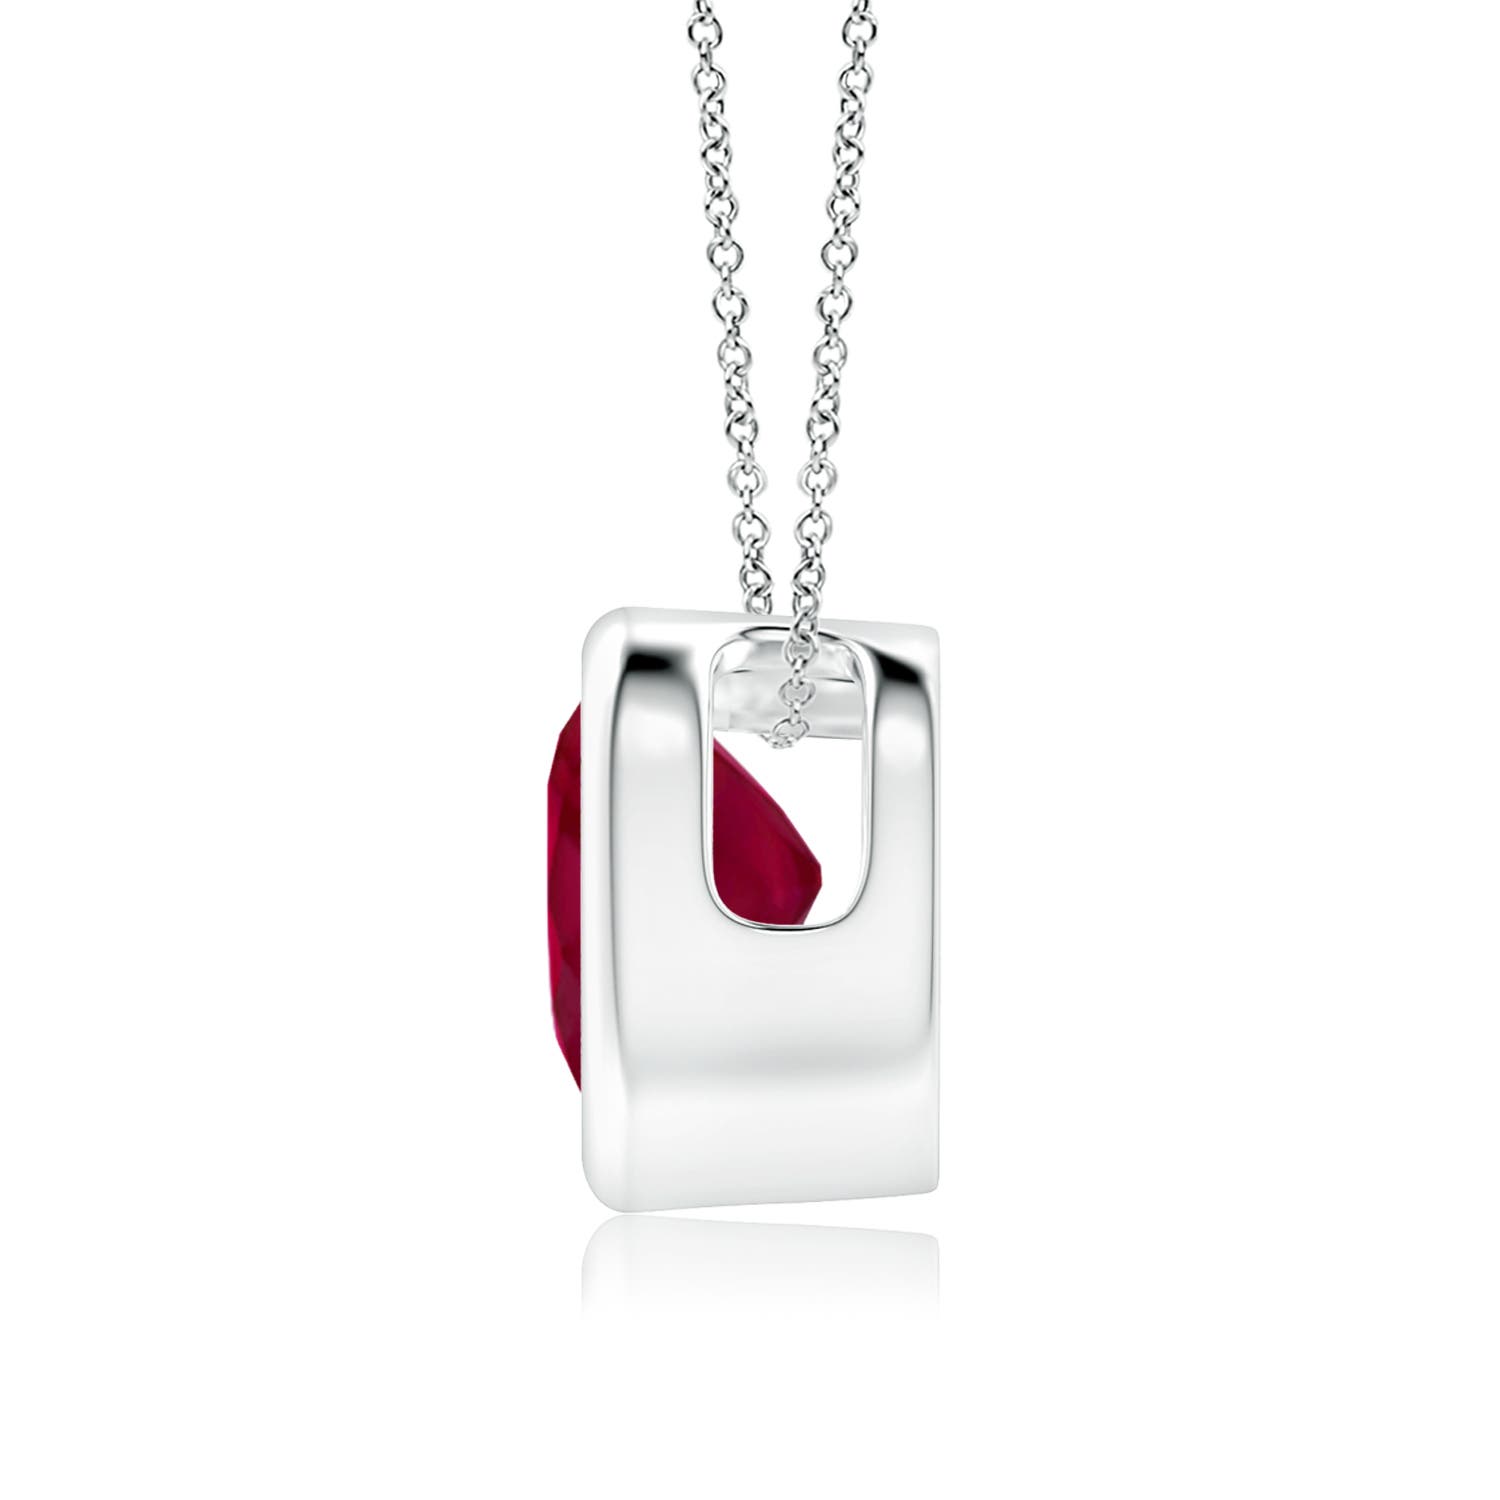 A - Ruby / 0.8 CT / 14 KT White Gold